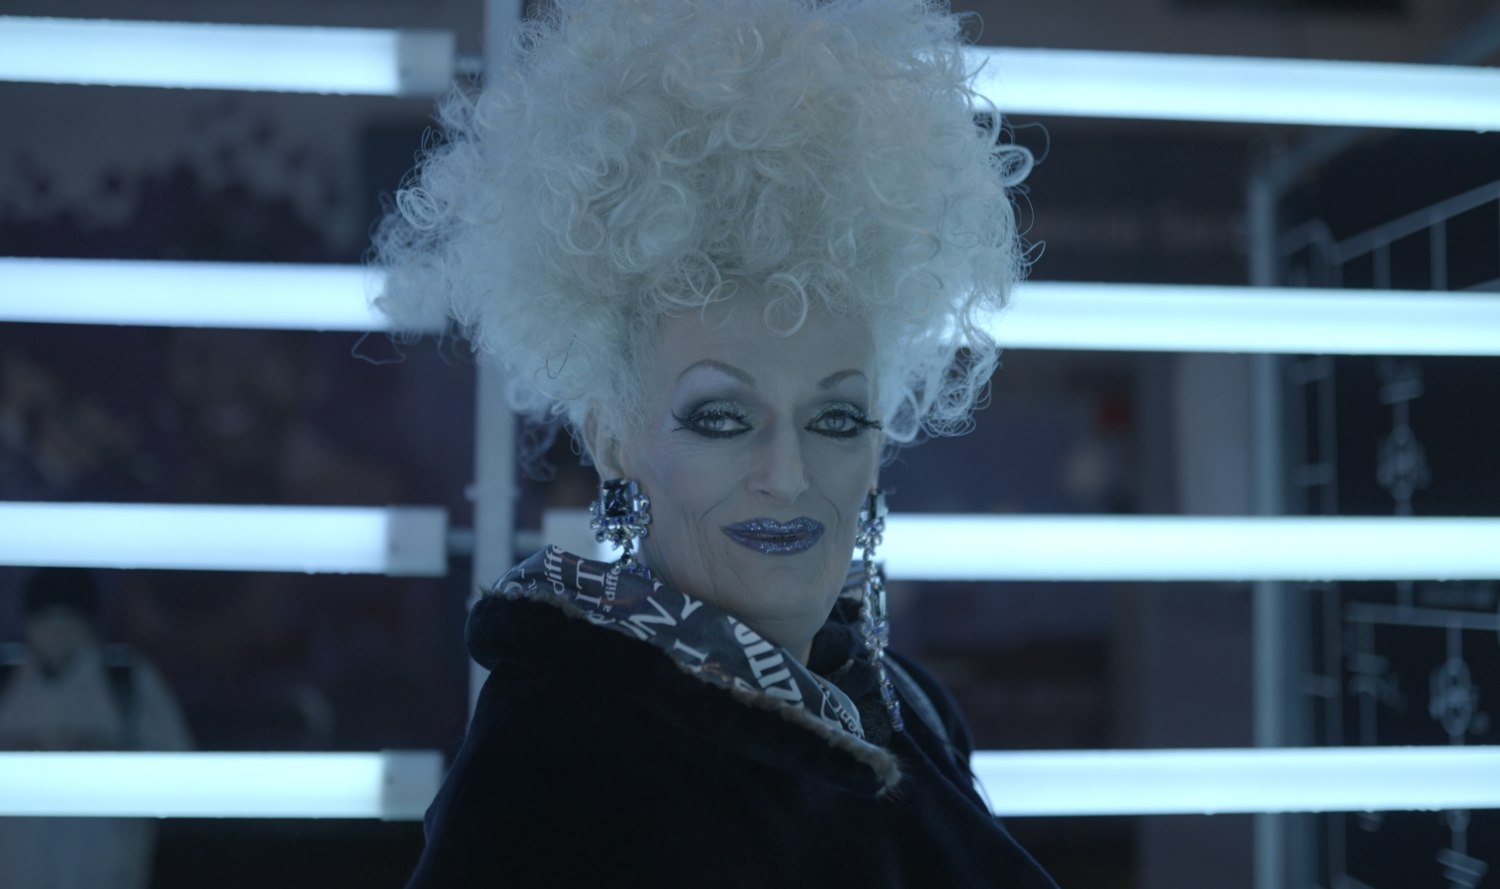 Glamourous woman with glittery makeup, an updo and large dangling earrings wearing a fur lined, collared coat. Drag Icon Oliv Howe.